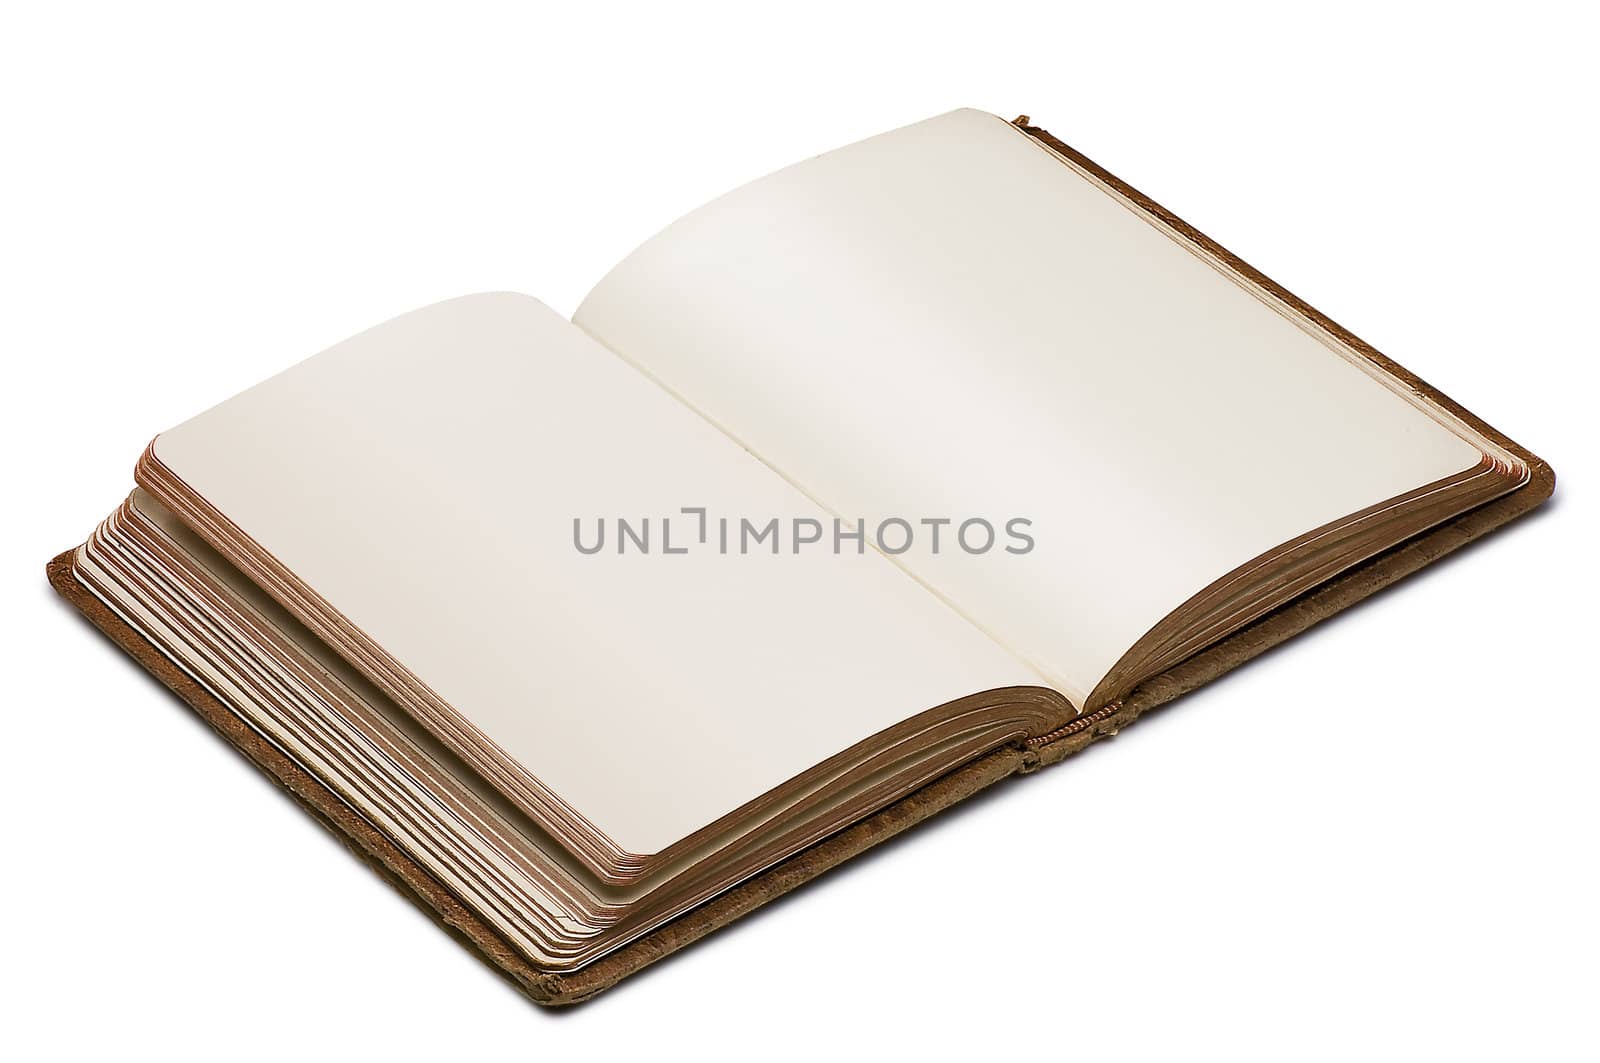 Book (clipping path ) by pbombaert